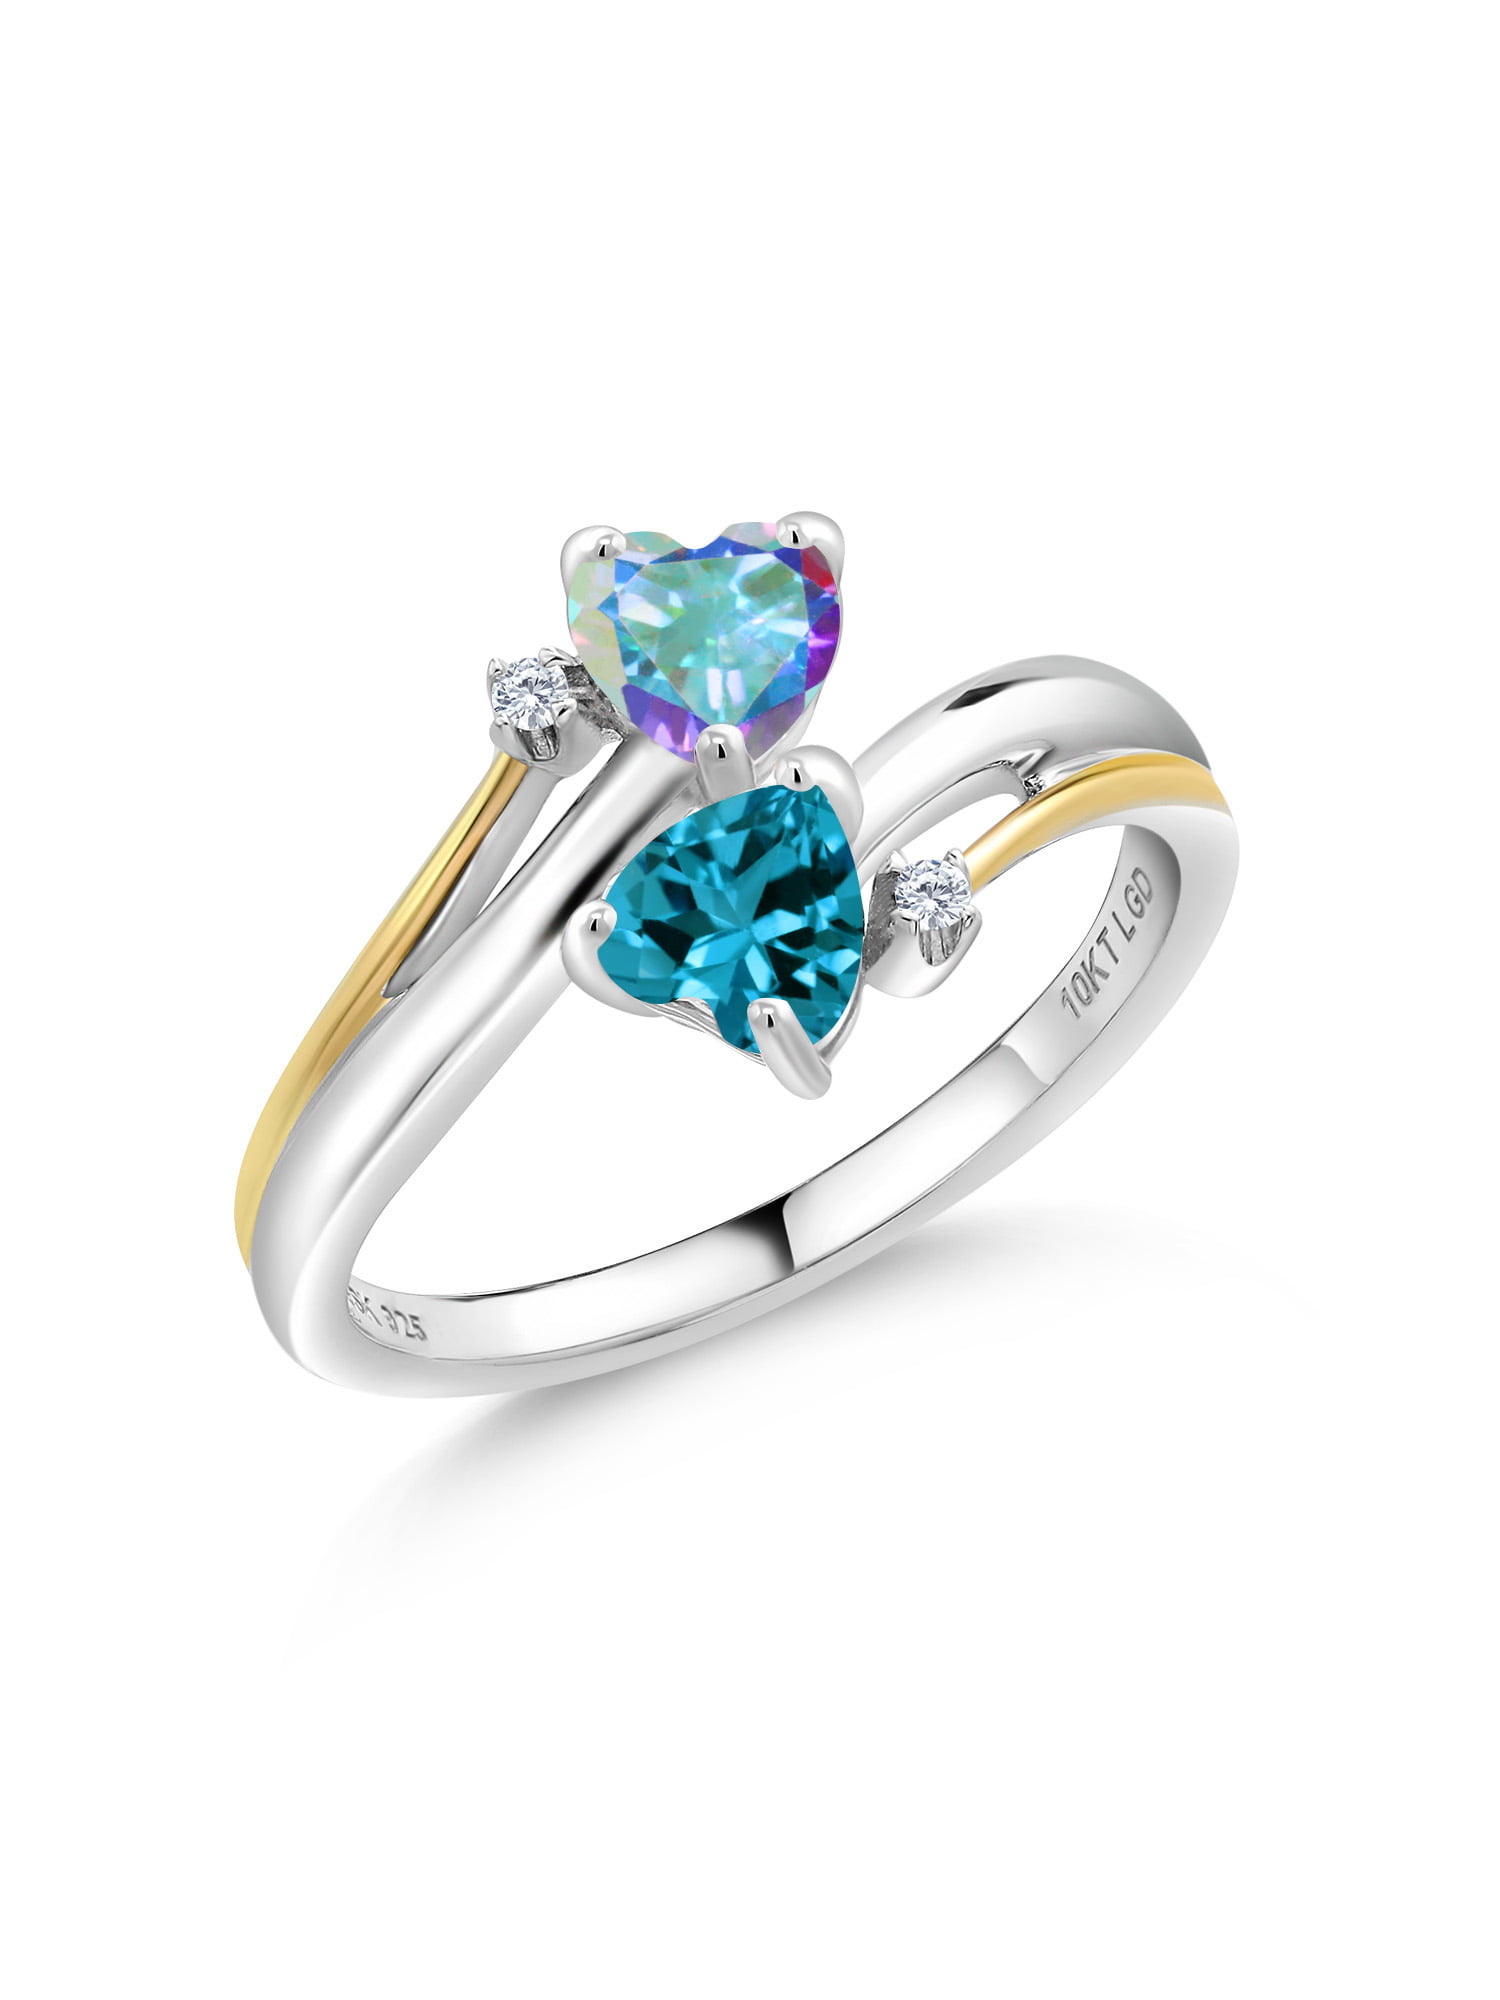 Lab Created Mystic Topaz 925 Sterling Silver Handmade Certified Mystic Topaz Stone Engagement Gift Ring